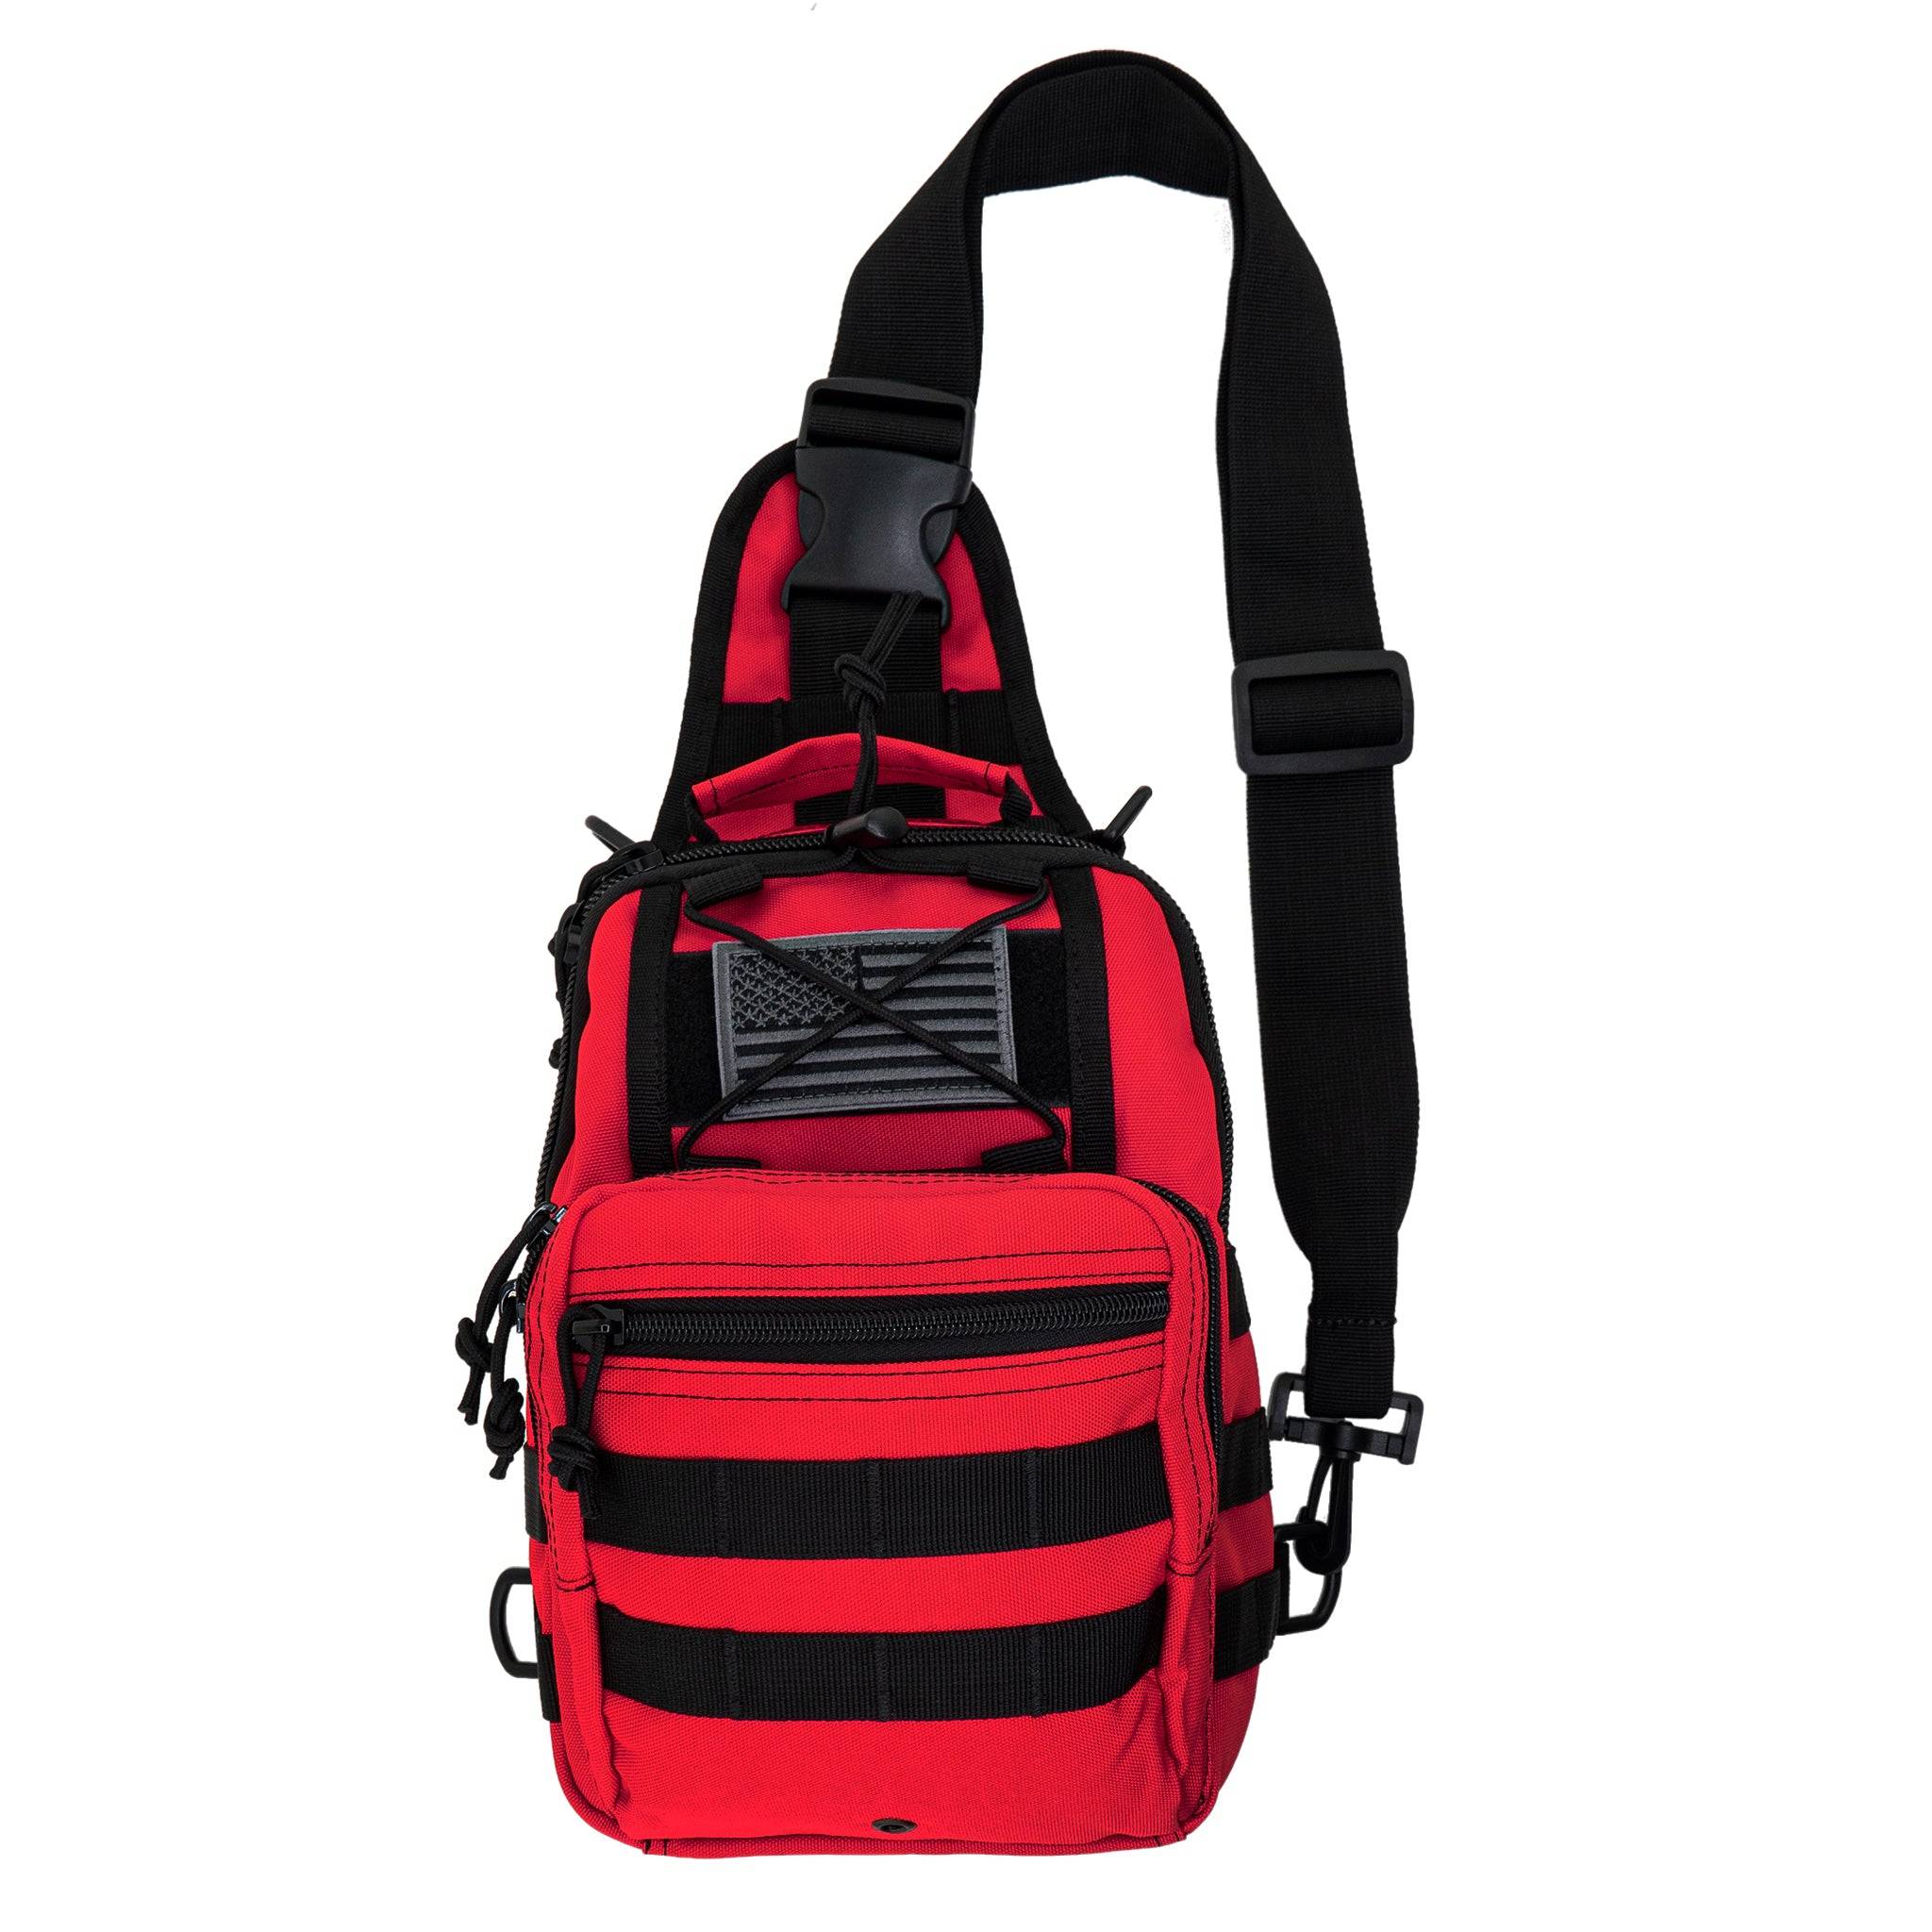 3251-98 Sling Shot Sling Backpack Leed's Promotional Products